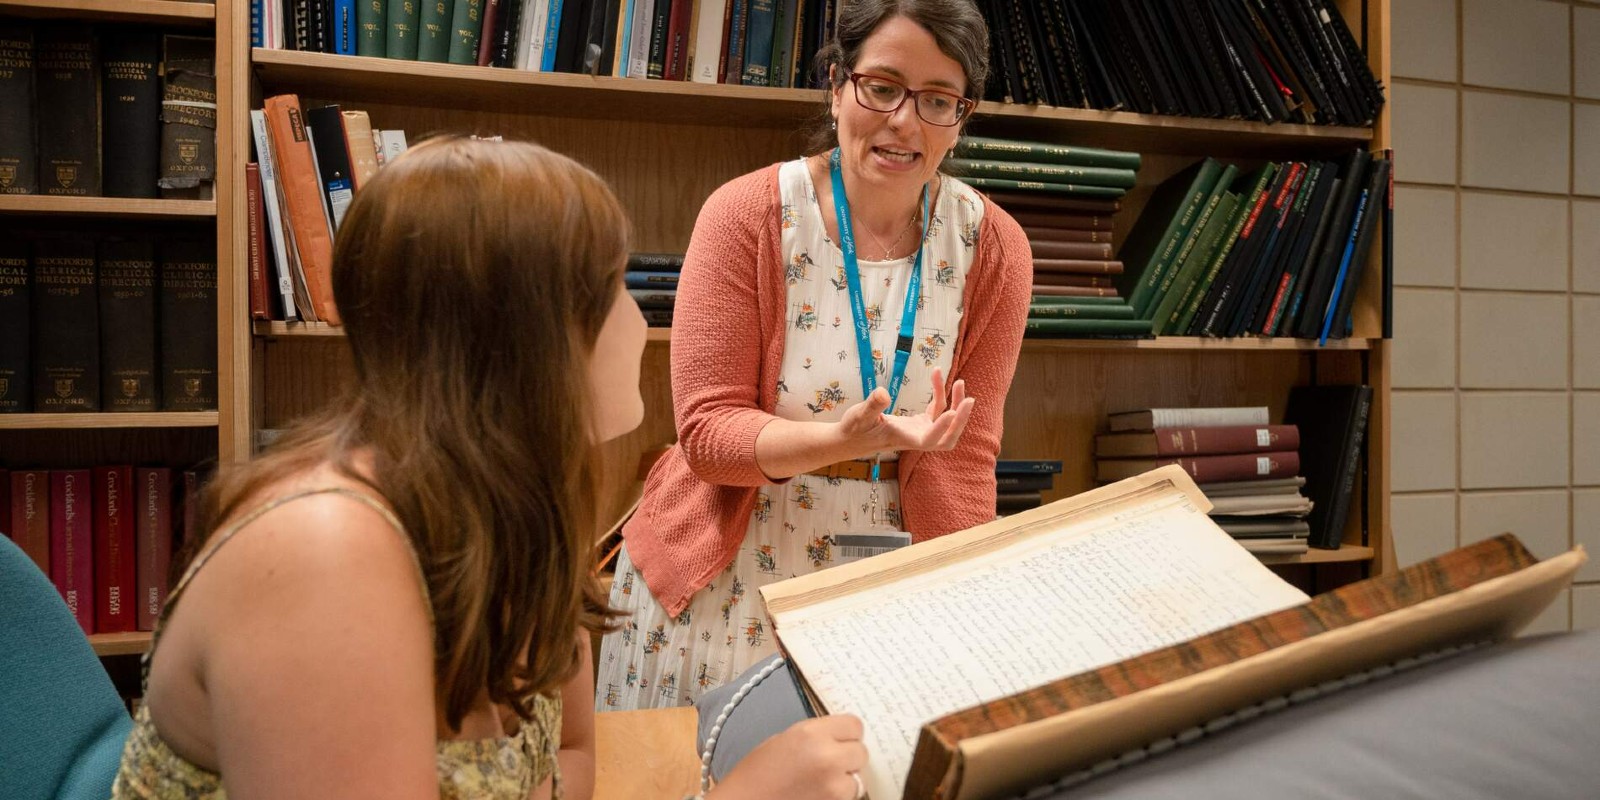 A staff member instructing a student while viewing archive material